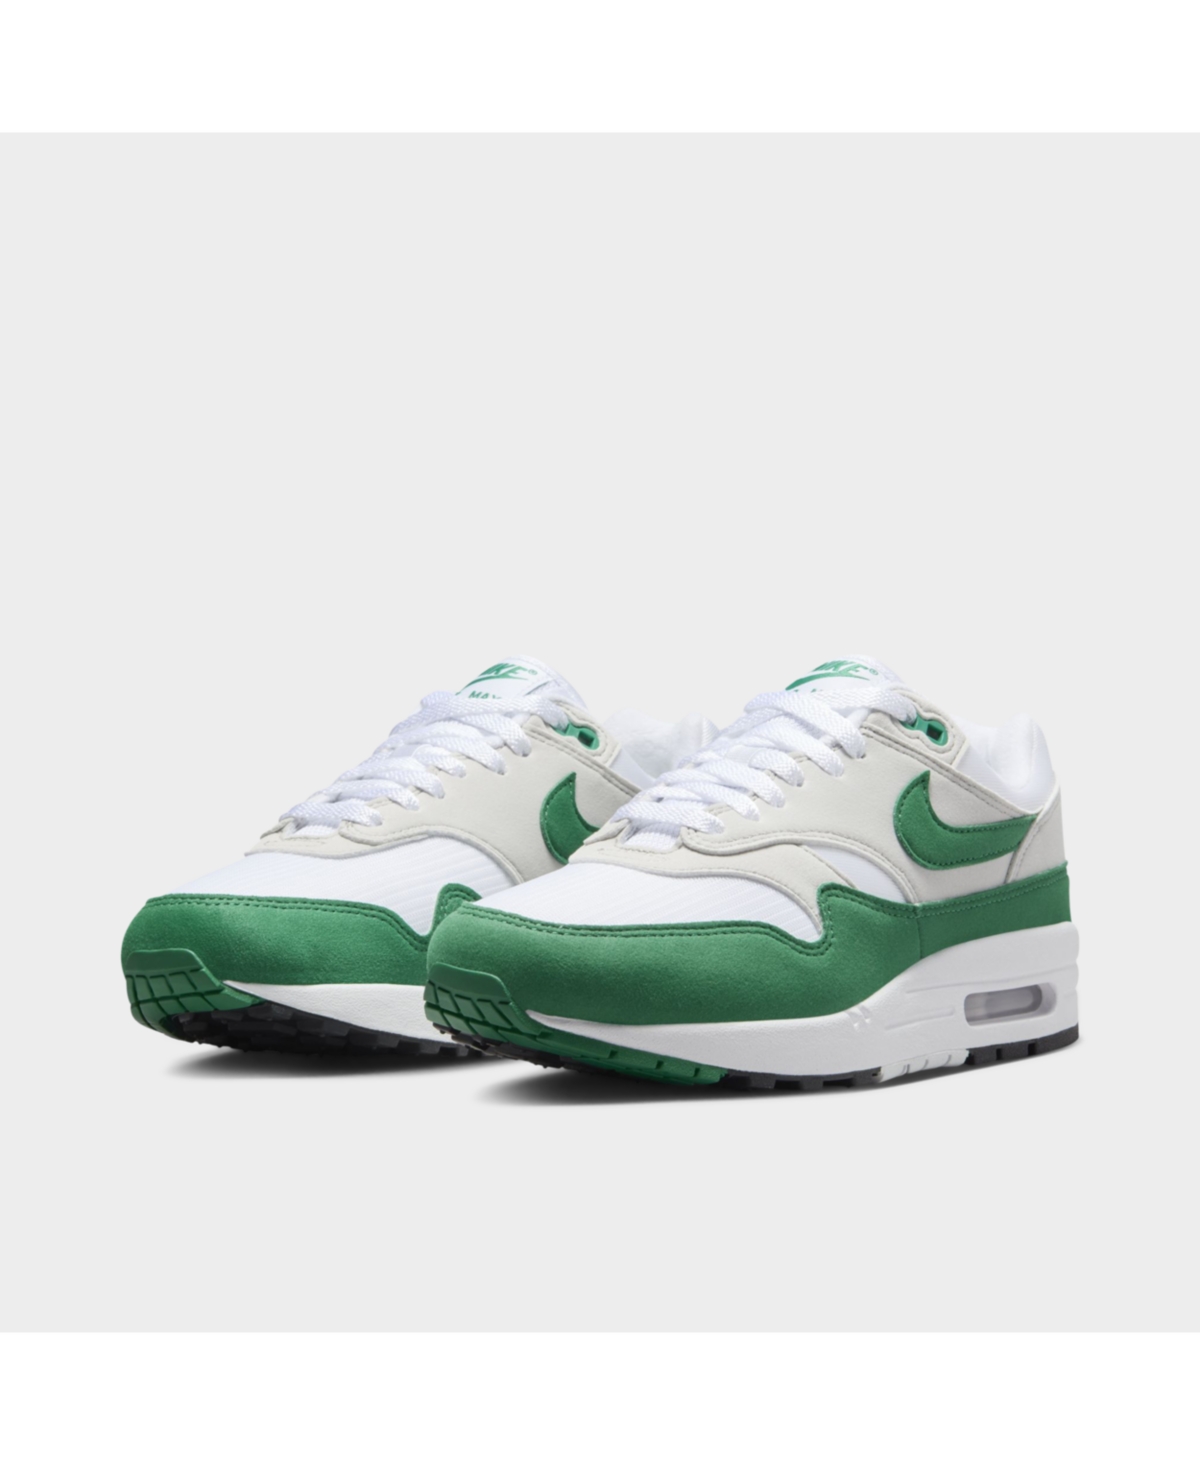 Women's Air Max 1 '87 Casual Sneakers from Finish Line - Neutral Gray, Malachite, White